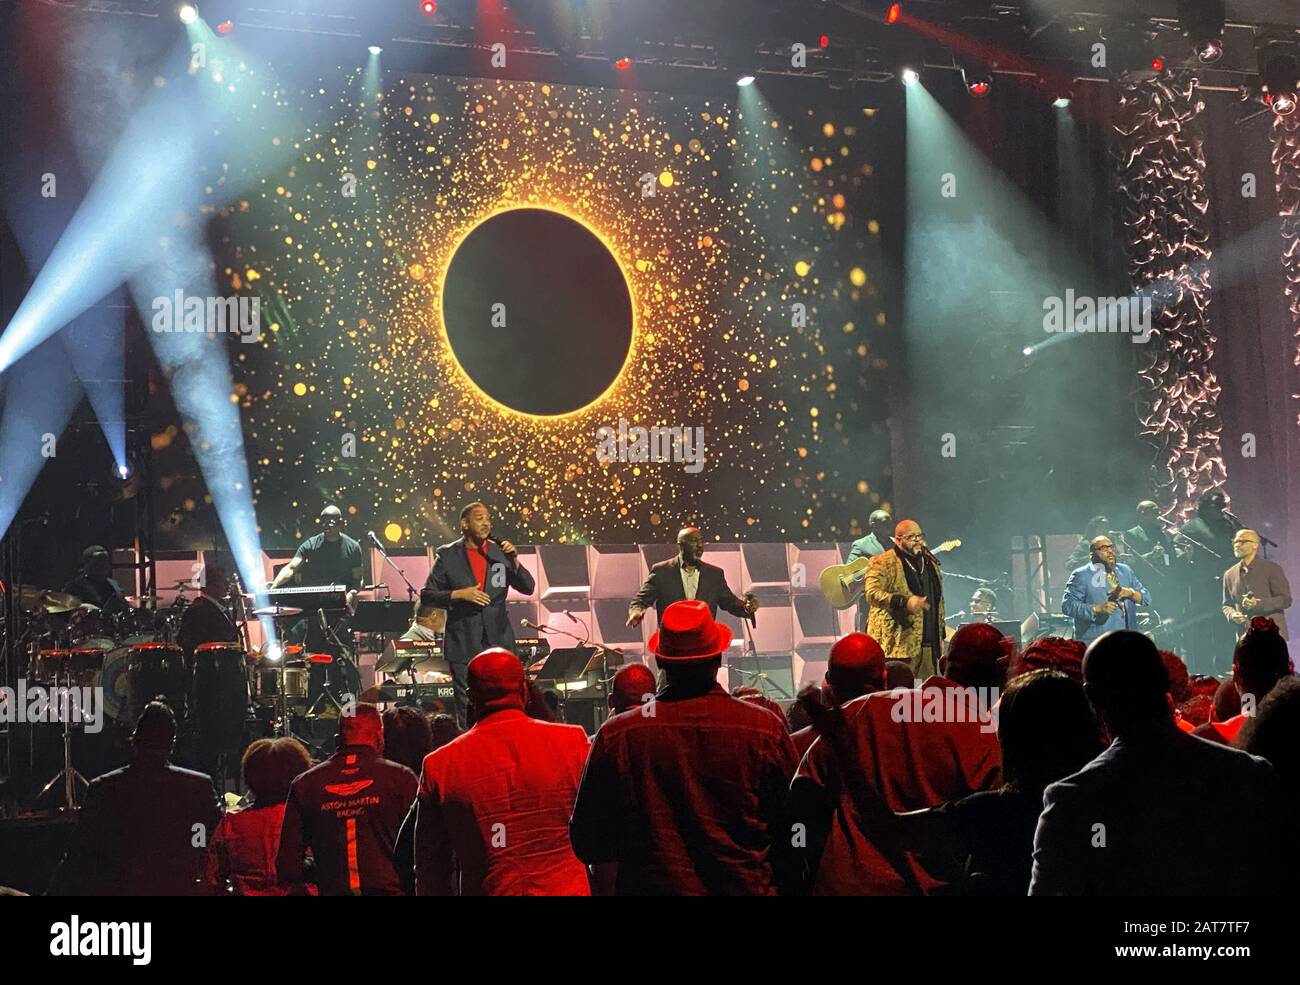 Miami, United States. 31st Jan, 2020. Commissioned performs onstage during Super Bowl LIV week at the 21st Super Bowl Gospel Celebration at the James L. Knight Center in Miami, Florida on Thursday, January 30, 2020. The Super Bowl Gospel Celebration was launched in Miami in 1999 during Super Bowl XXXIII weekend. The event became the first and remains the only gospel concert sanctioned by the National Football League (NFL). Photo By Gary I Rothstein/UPI Credit: UPI/Alamy Live News Stock Photo